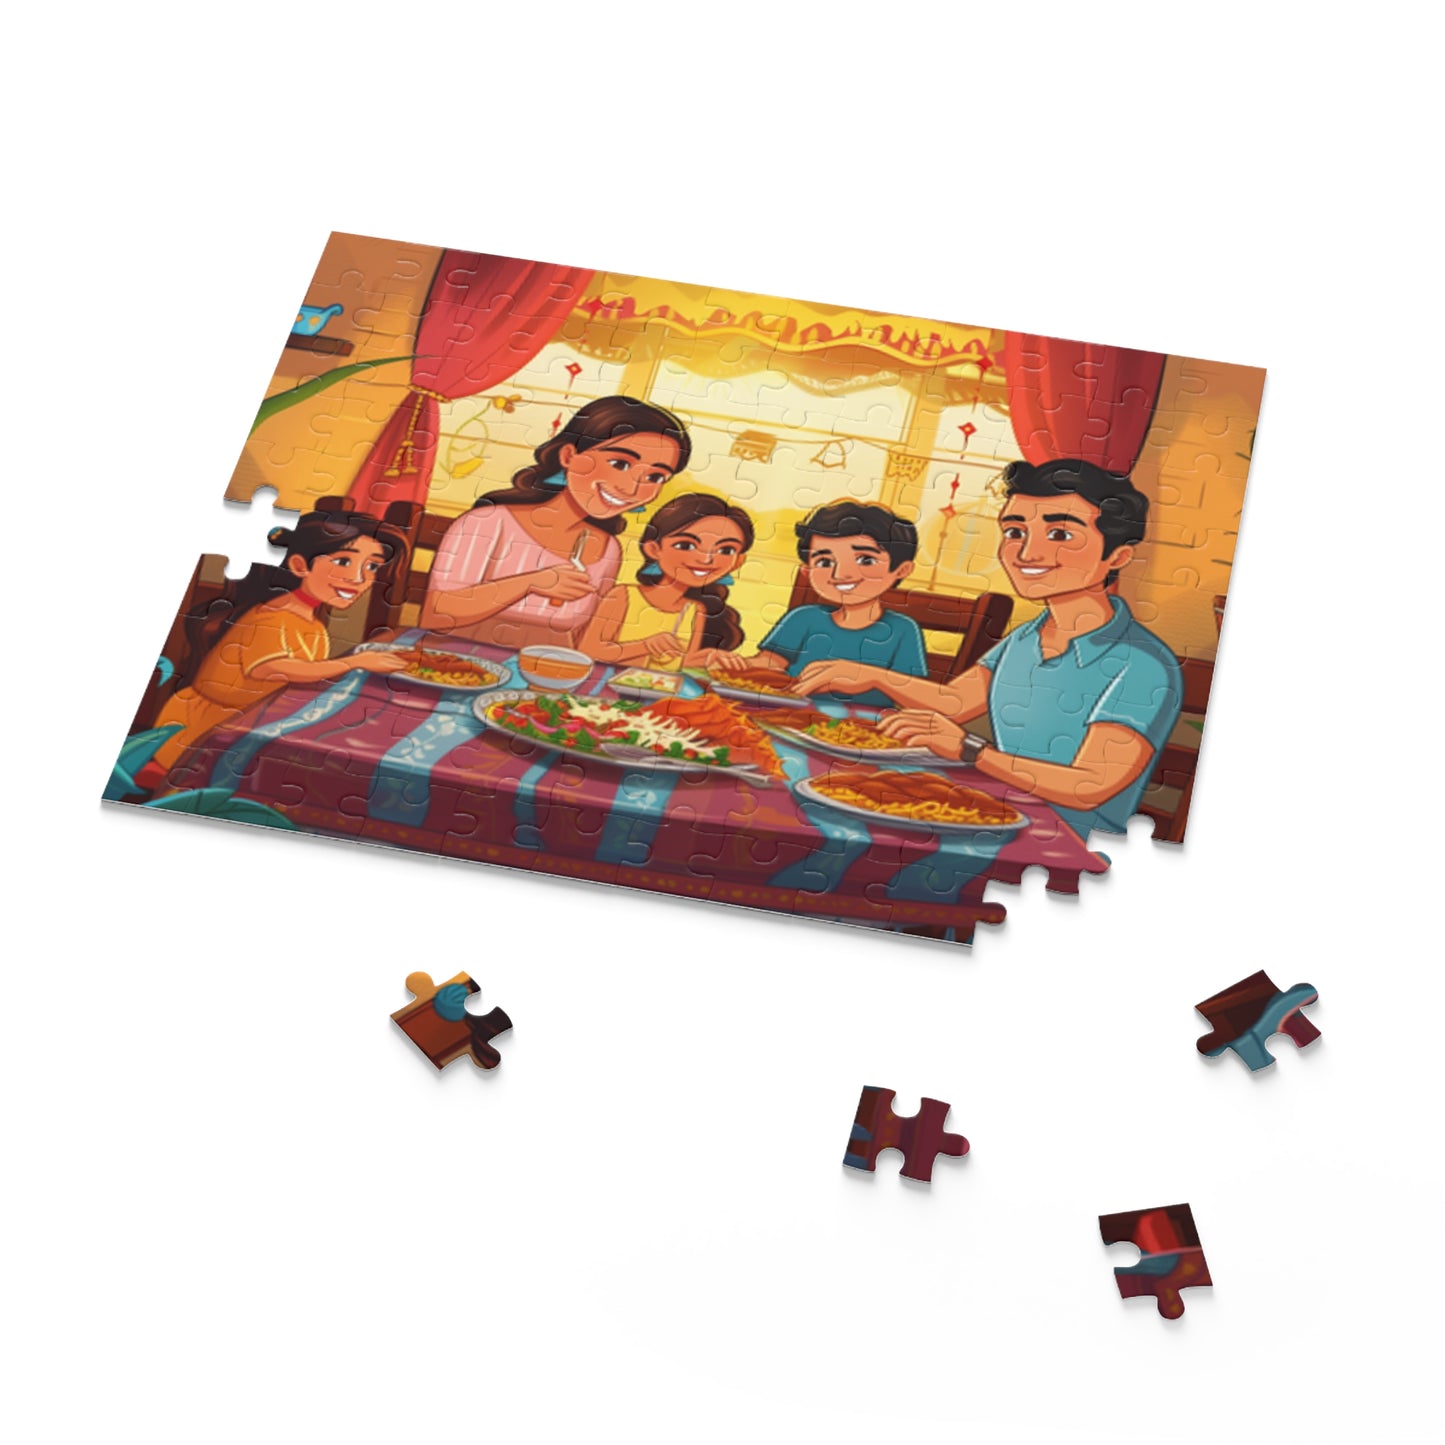 Mexican Family Retro Art Jigsaw Puzzle Adult Birthday Business Jigsaw Puzzle Gift for Him Funny Humorous Indoor Outdoor Game Gift For Her Online-7